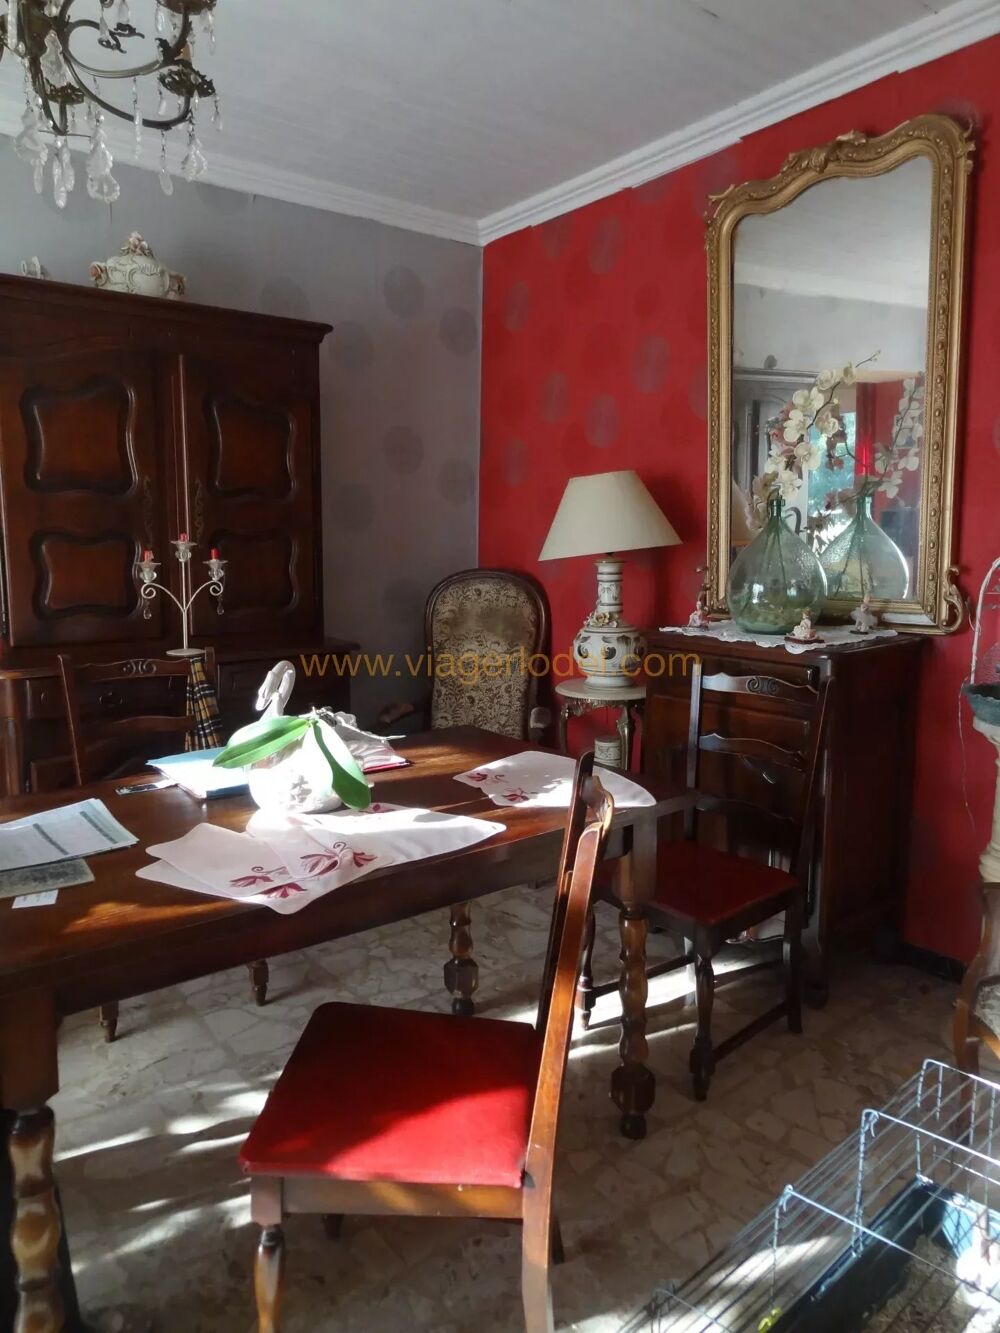 Vente Viager Rf. annonce : 9409 - VIAGER OCCUPE SANS RENTE - NIMES (30) Nmes